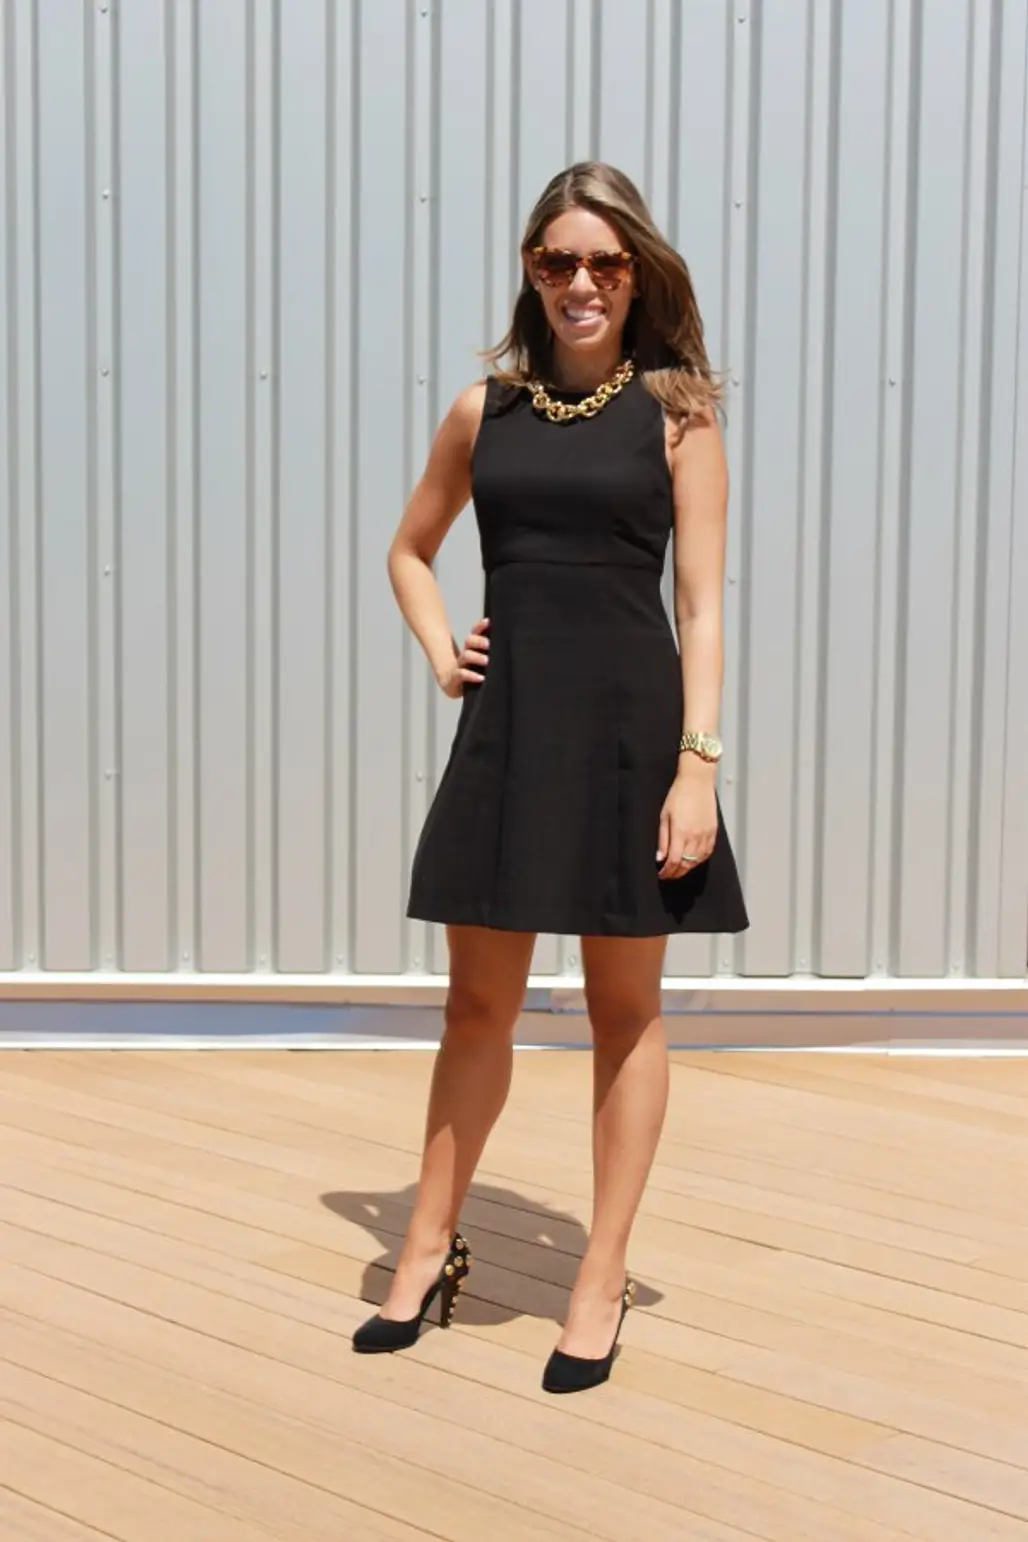 7 Ways to Wear a Black Dress That Will Get You Noticed